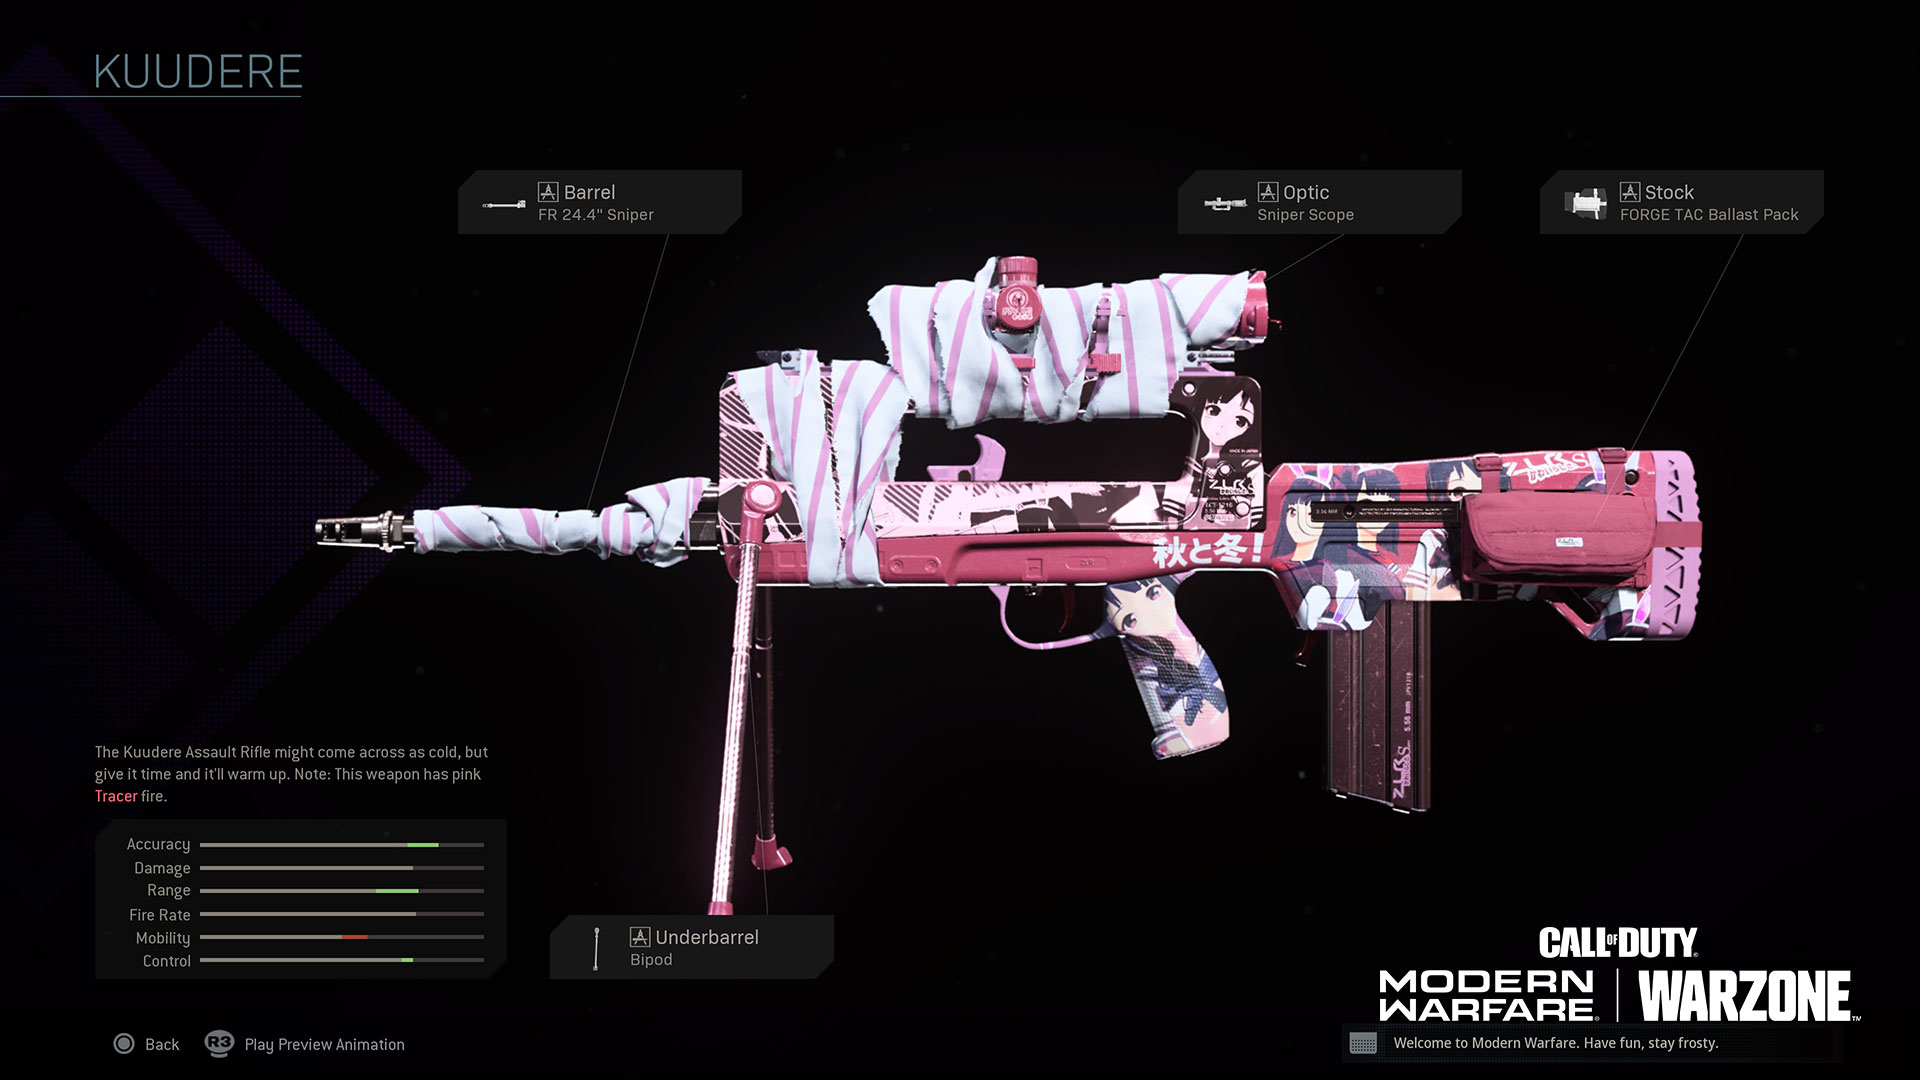 Call Of Duty Warzone Gets Anime Gun Skins In This Week S Update Pcgamesn If you're somehow still able to win with this hot pink target painted onto your back, it'll be a pretty impressive. call of duty warzone gets anime gun